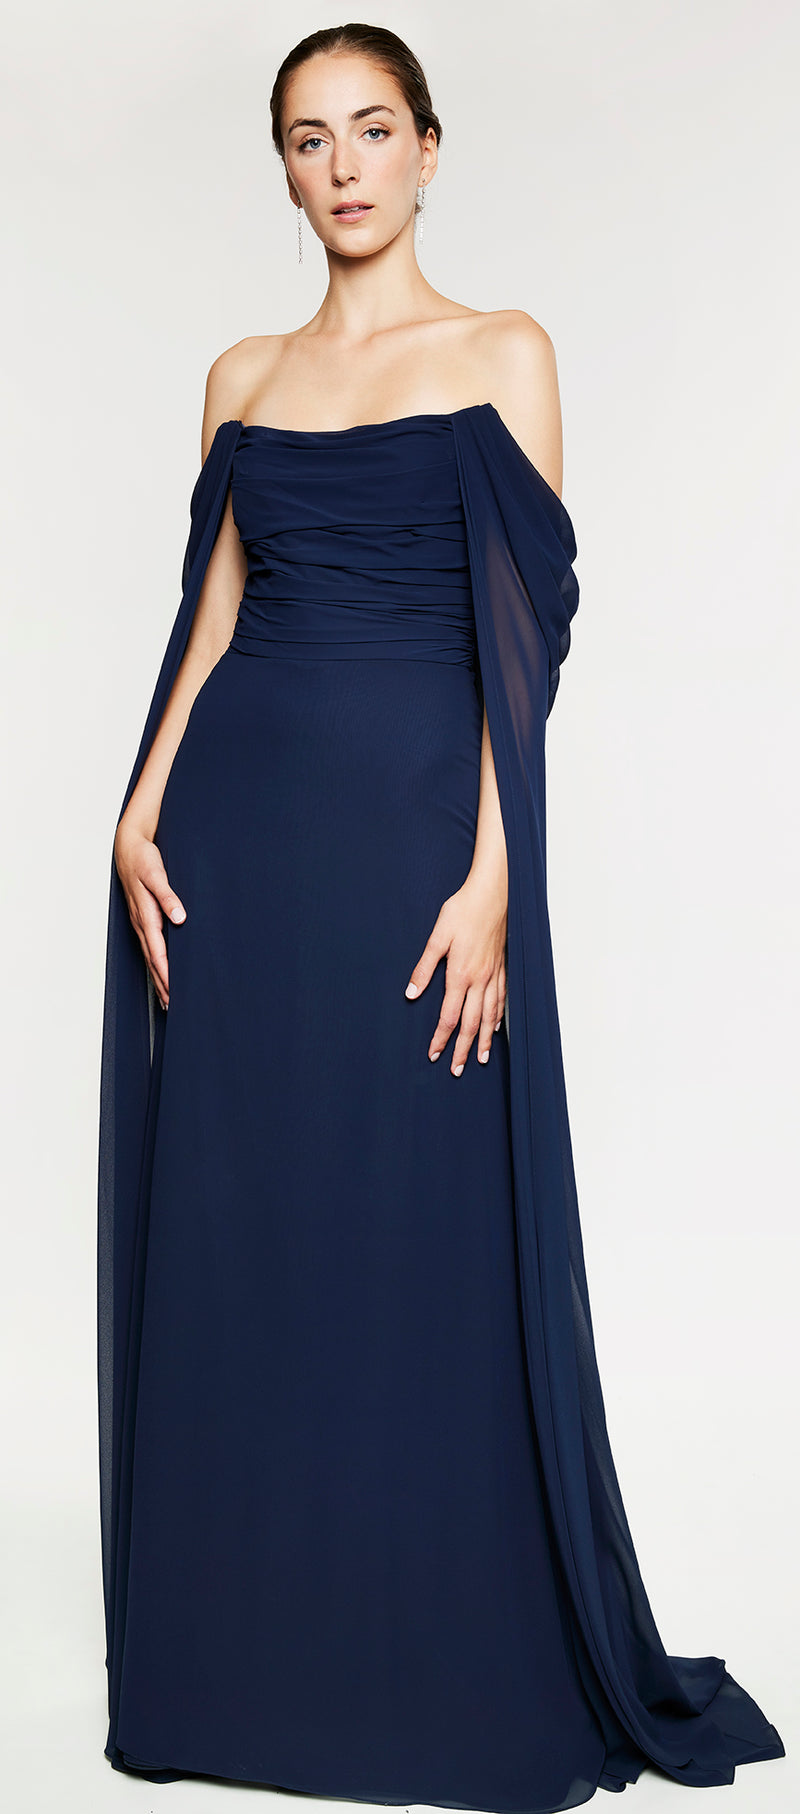 Off-the-Shoulder Gown